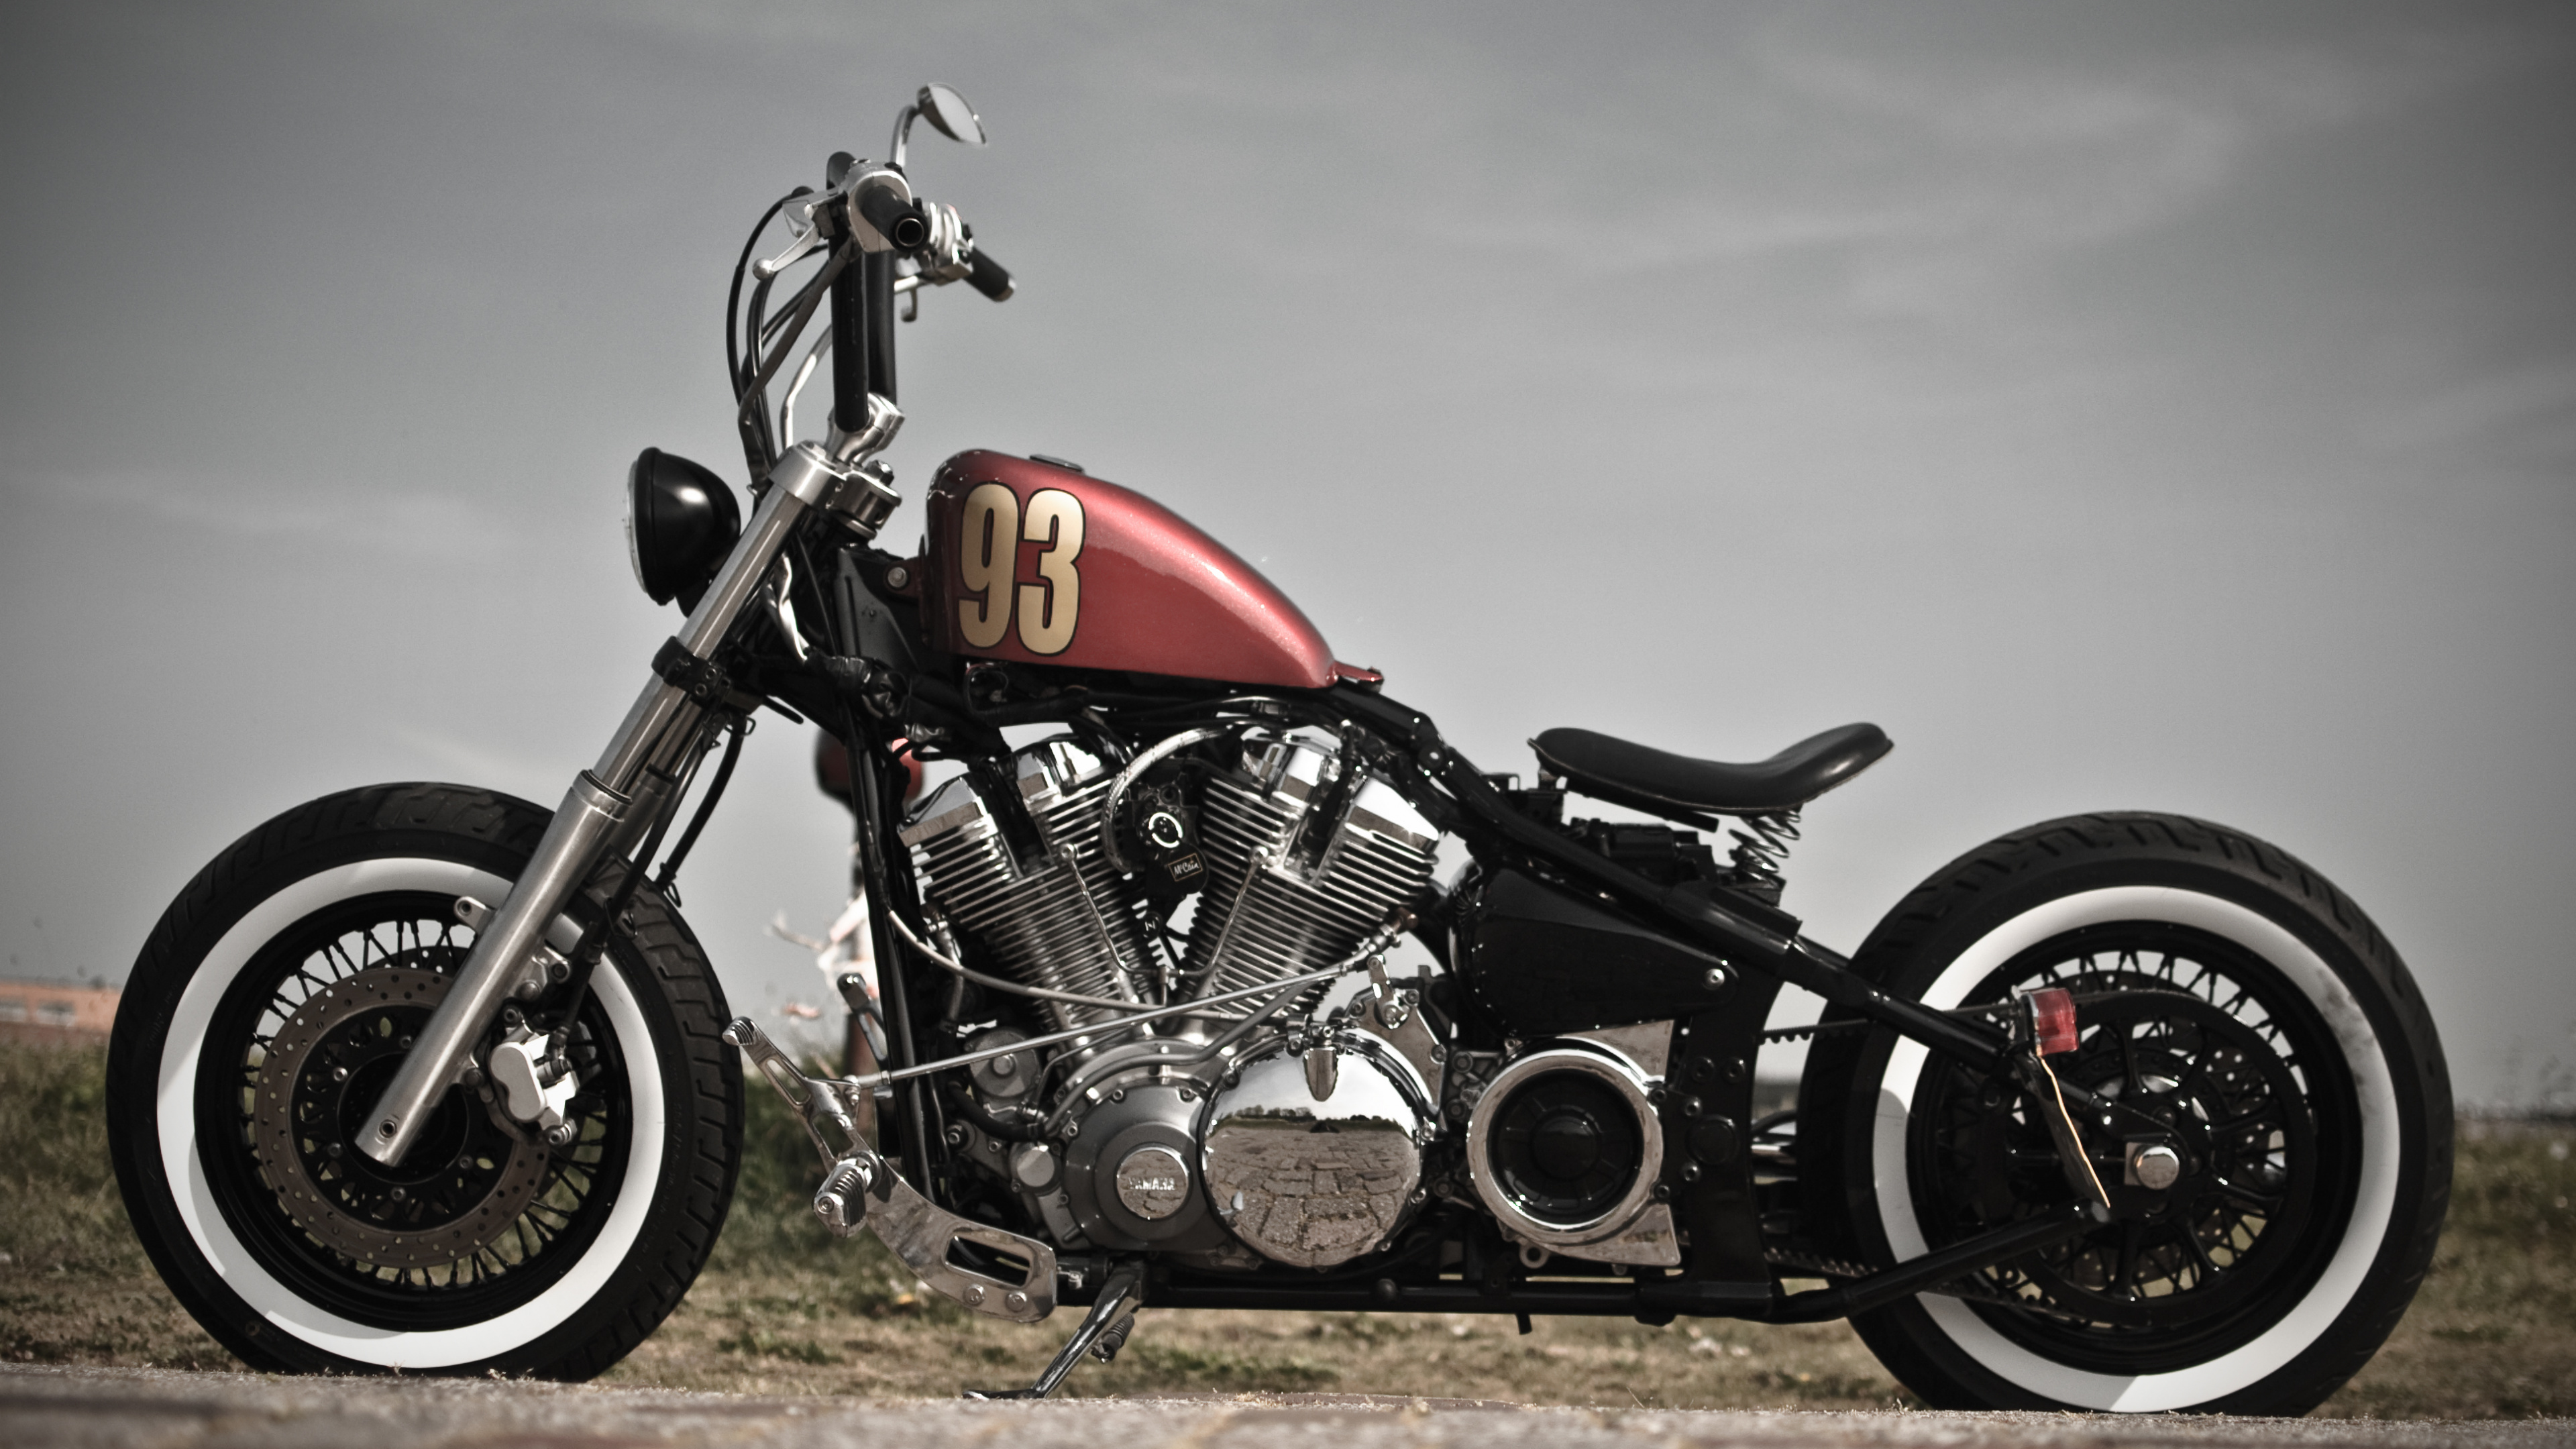 Red and Black Motorcycle on Brown Field. Wallpaper in 3840x2160 Resolution